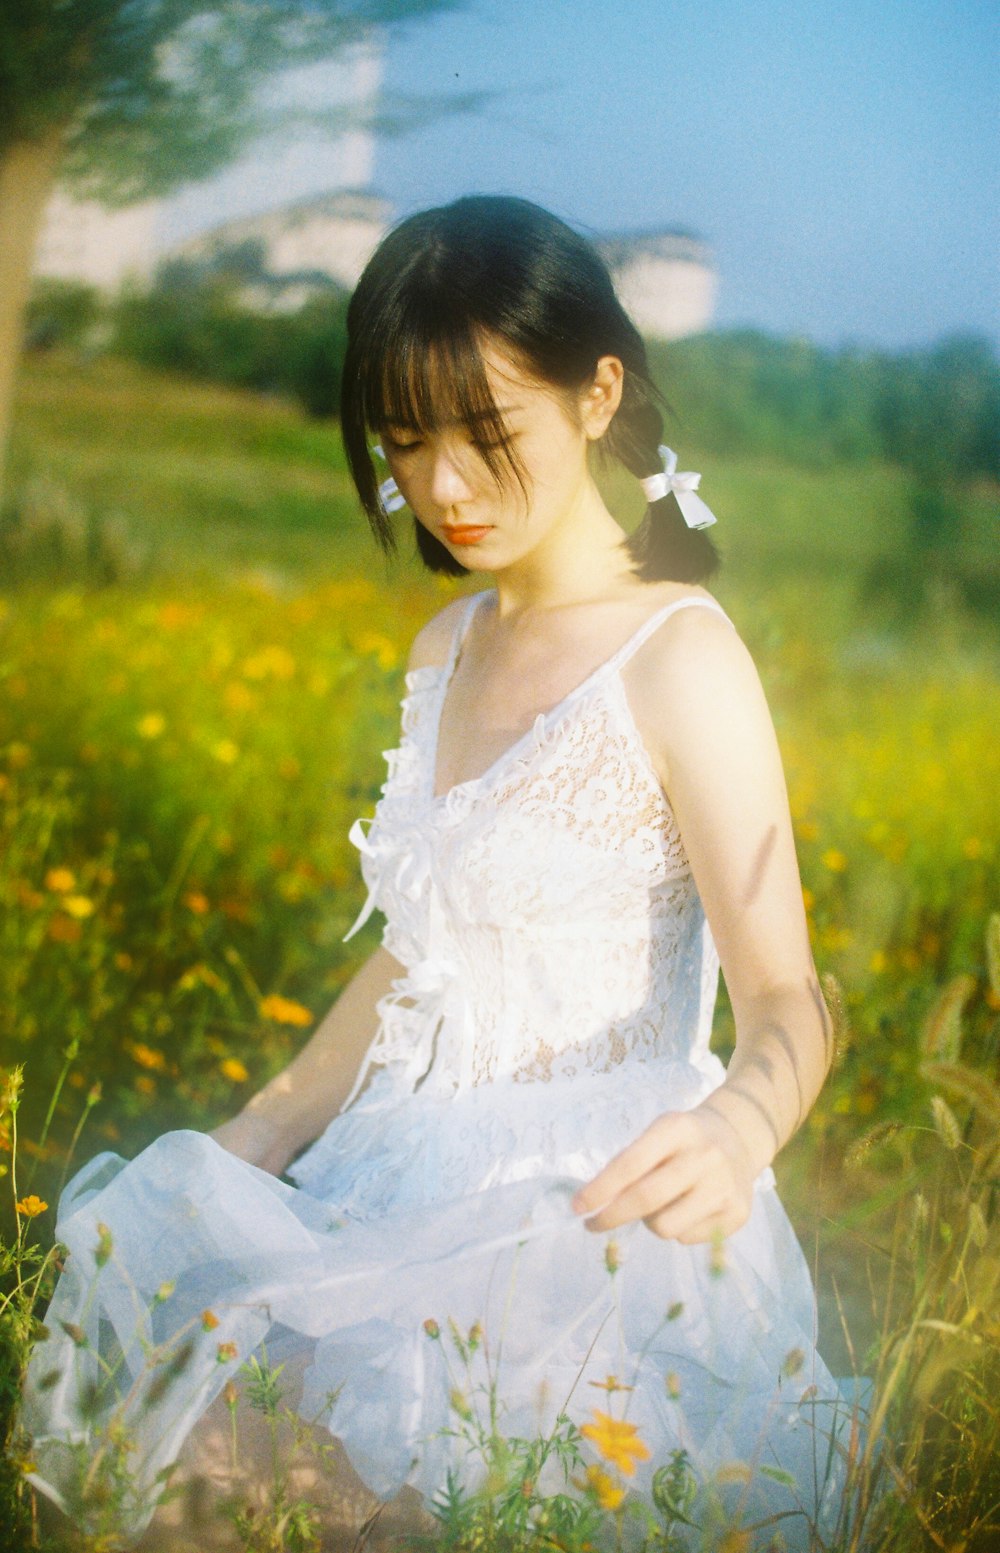 woman in white floral dress sitting on green grass field during daytime